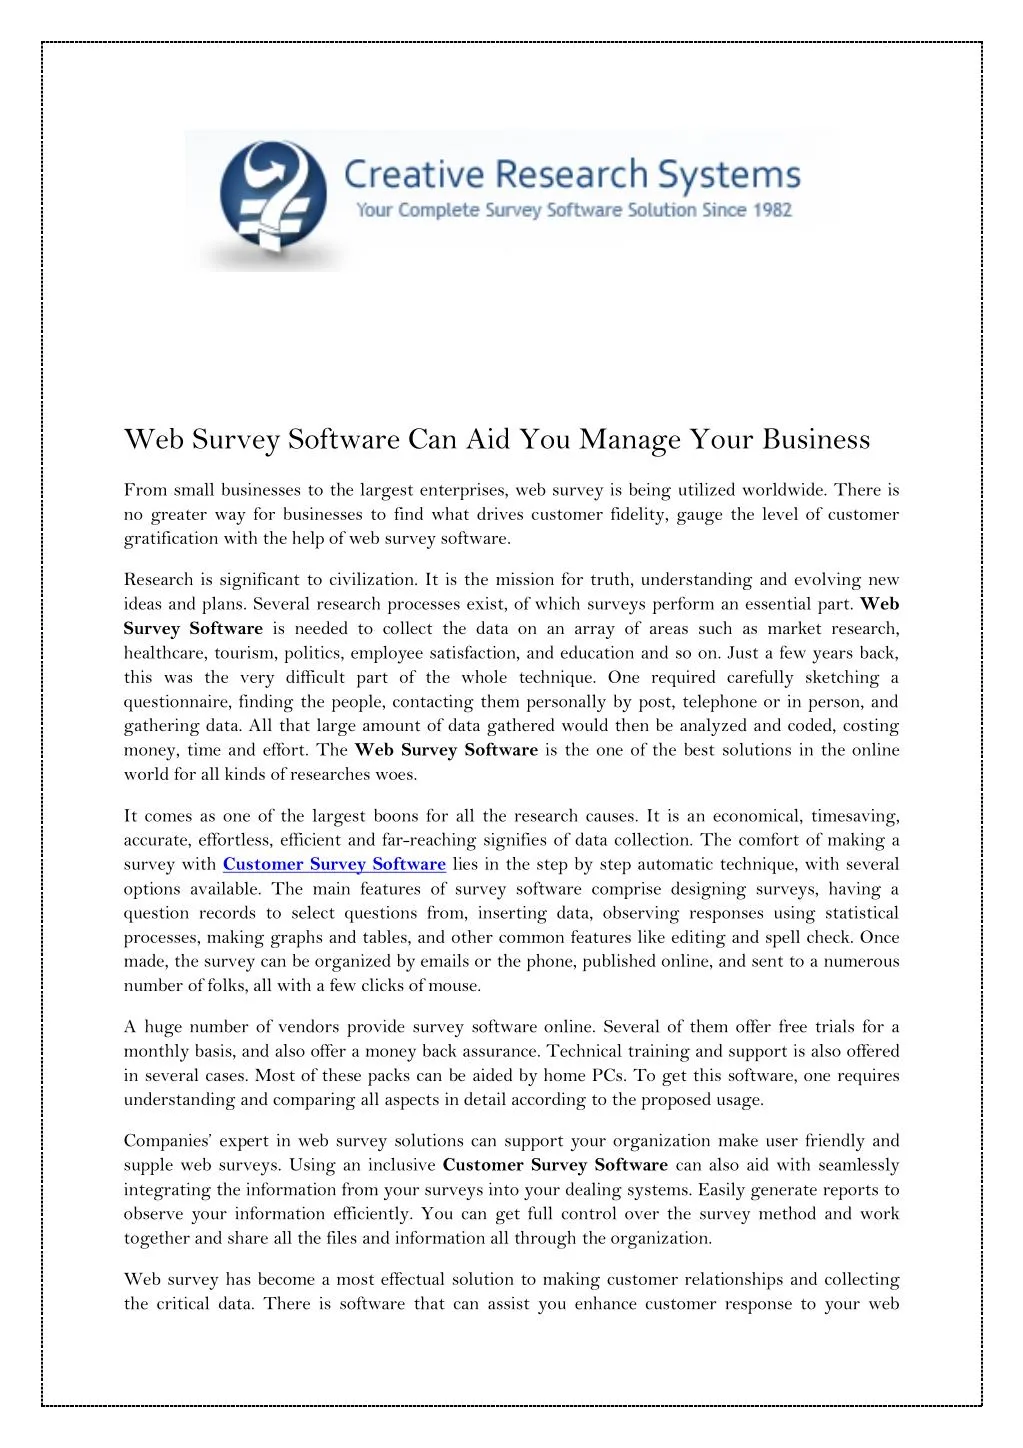 web survey software can aid you manage your